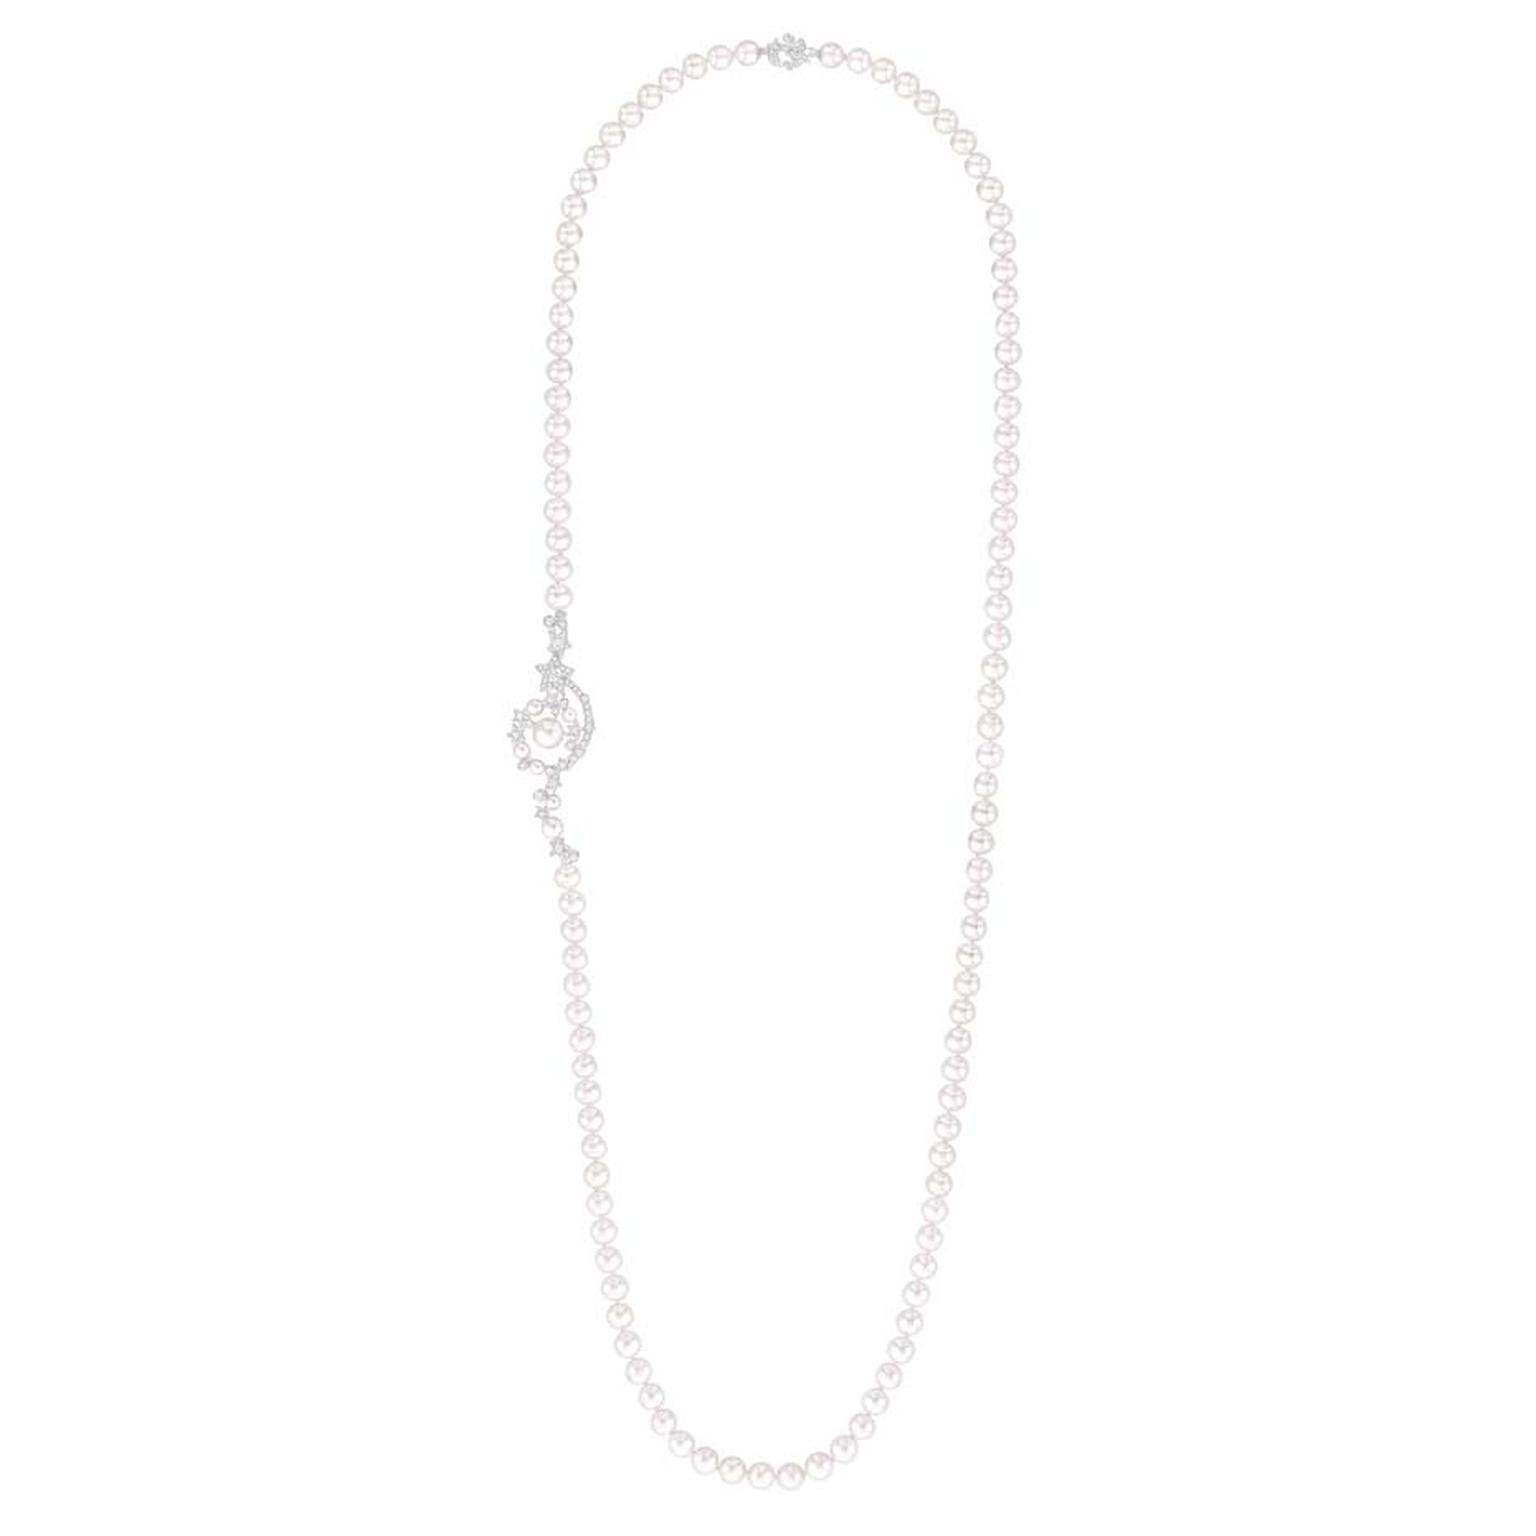 Chanel Voie Lactée necklace in white gold set with 193 brilliant-cut diamonds and 89 cultured pearls, from the Comete collection.